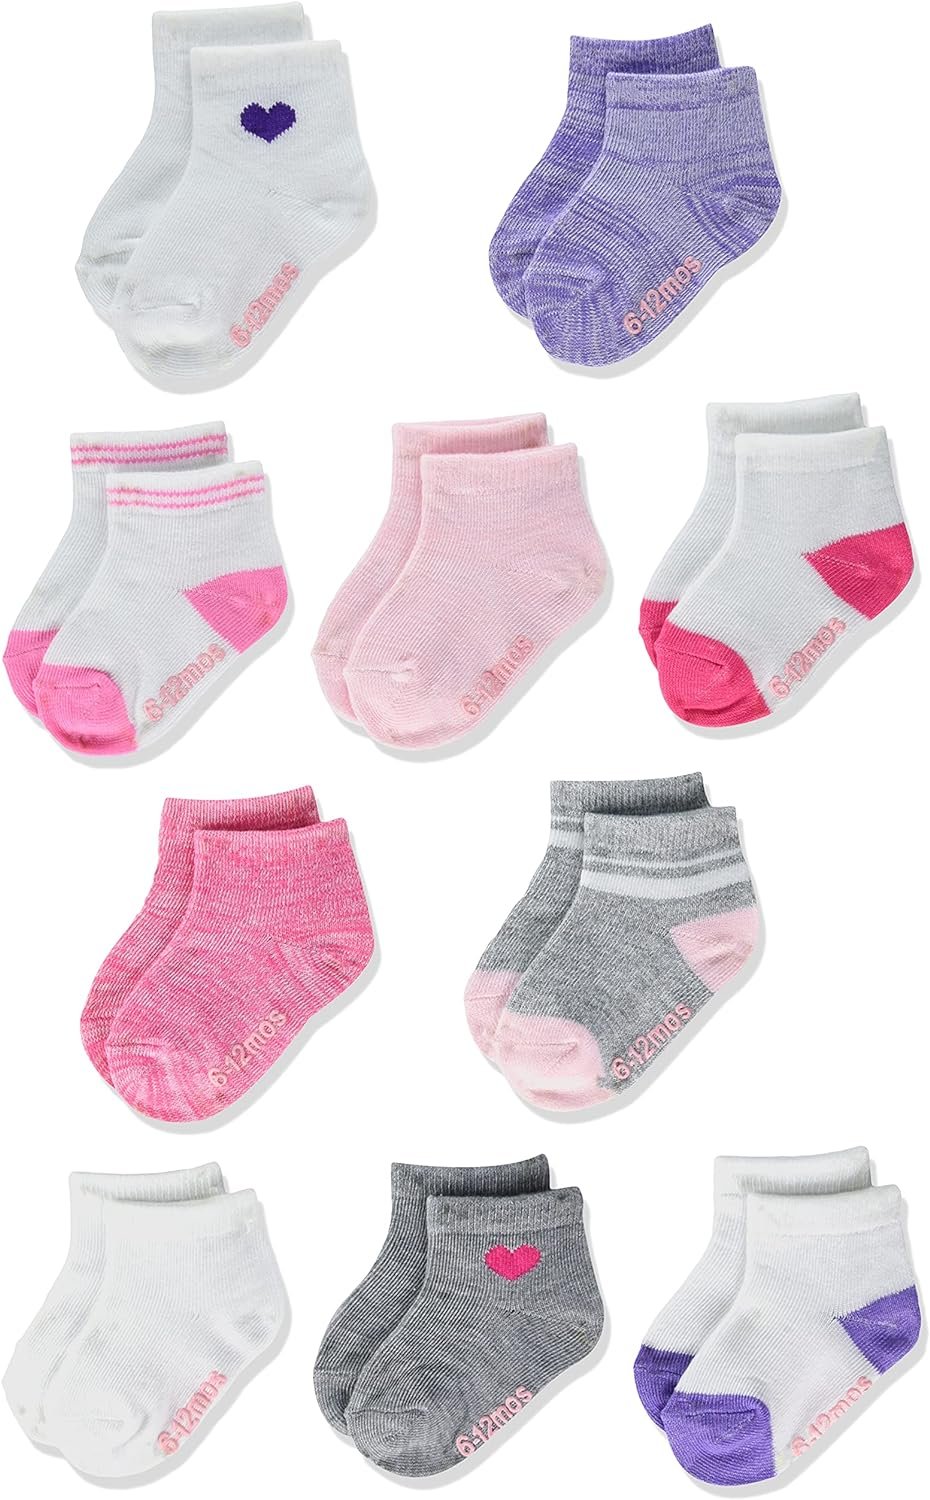 Hanes Baby and Toddler, Non-Slip Grip Ankle Socks, Boys and Girls, 10-Pair Packs